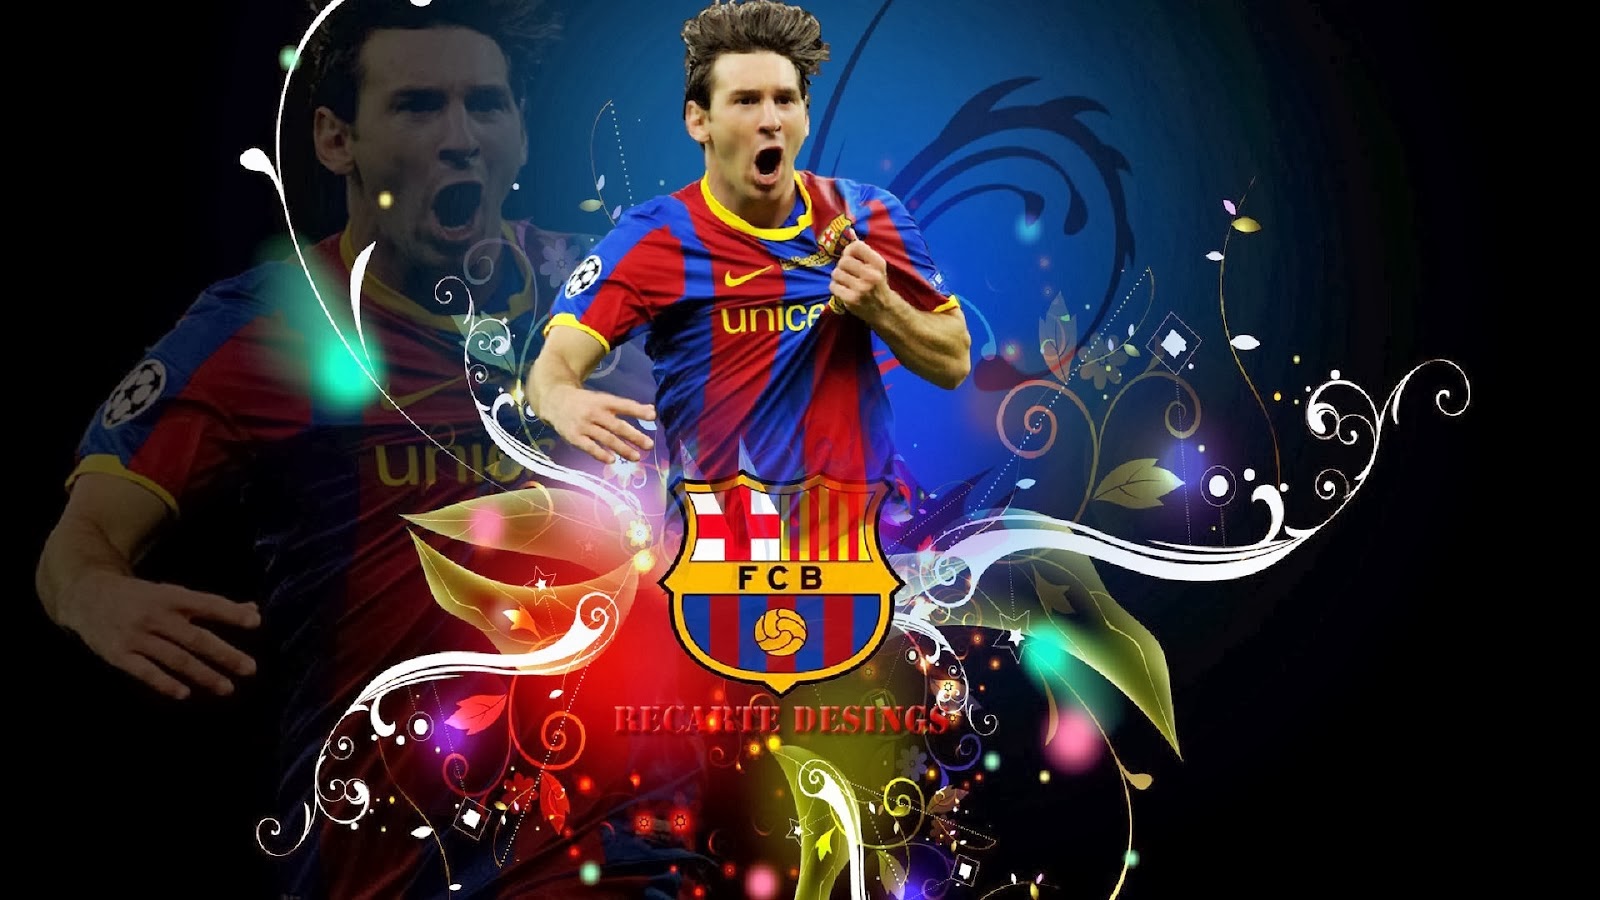 Lionel Messi 2014 HD Wallpaper Latest HD Wallpapers 1600x900